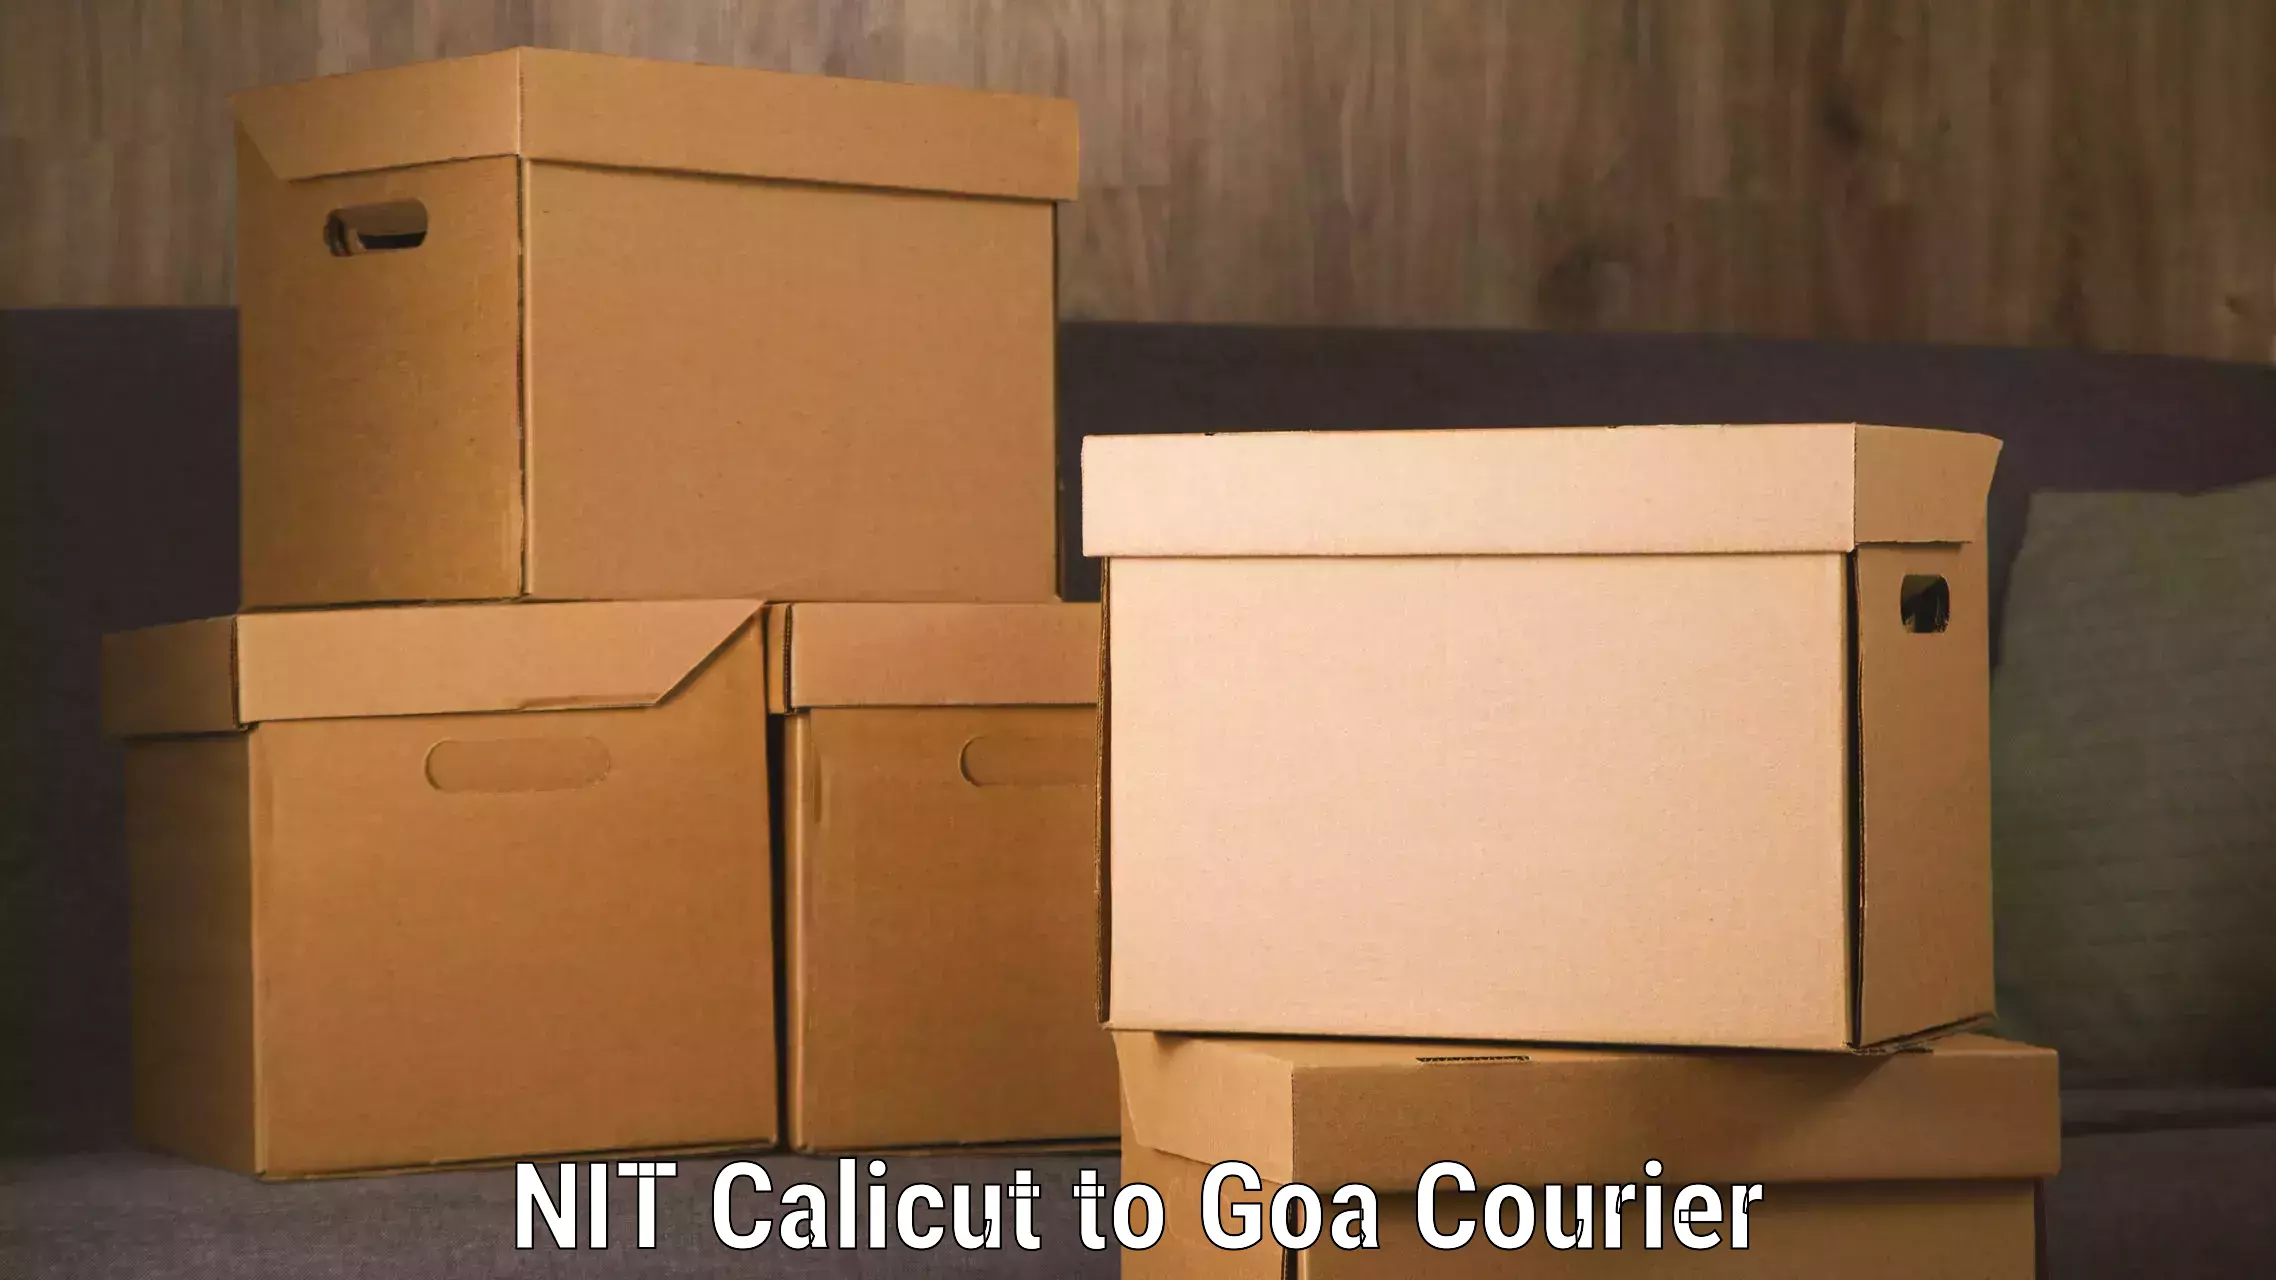 Express package delivery in NIT Calicut to Vasco da Gama